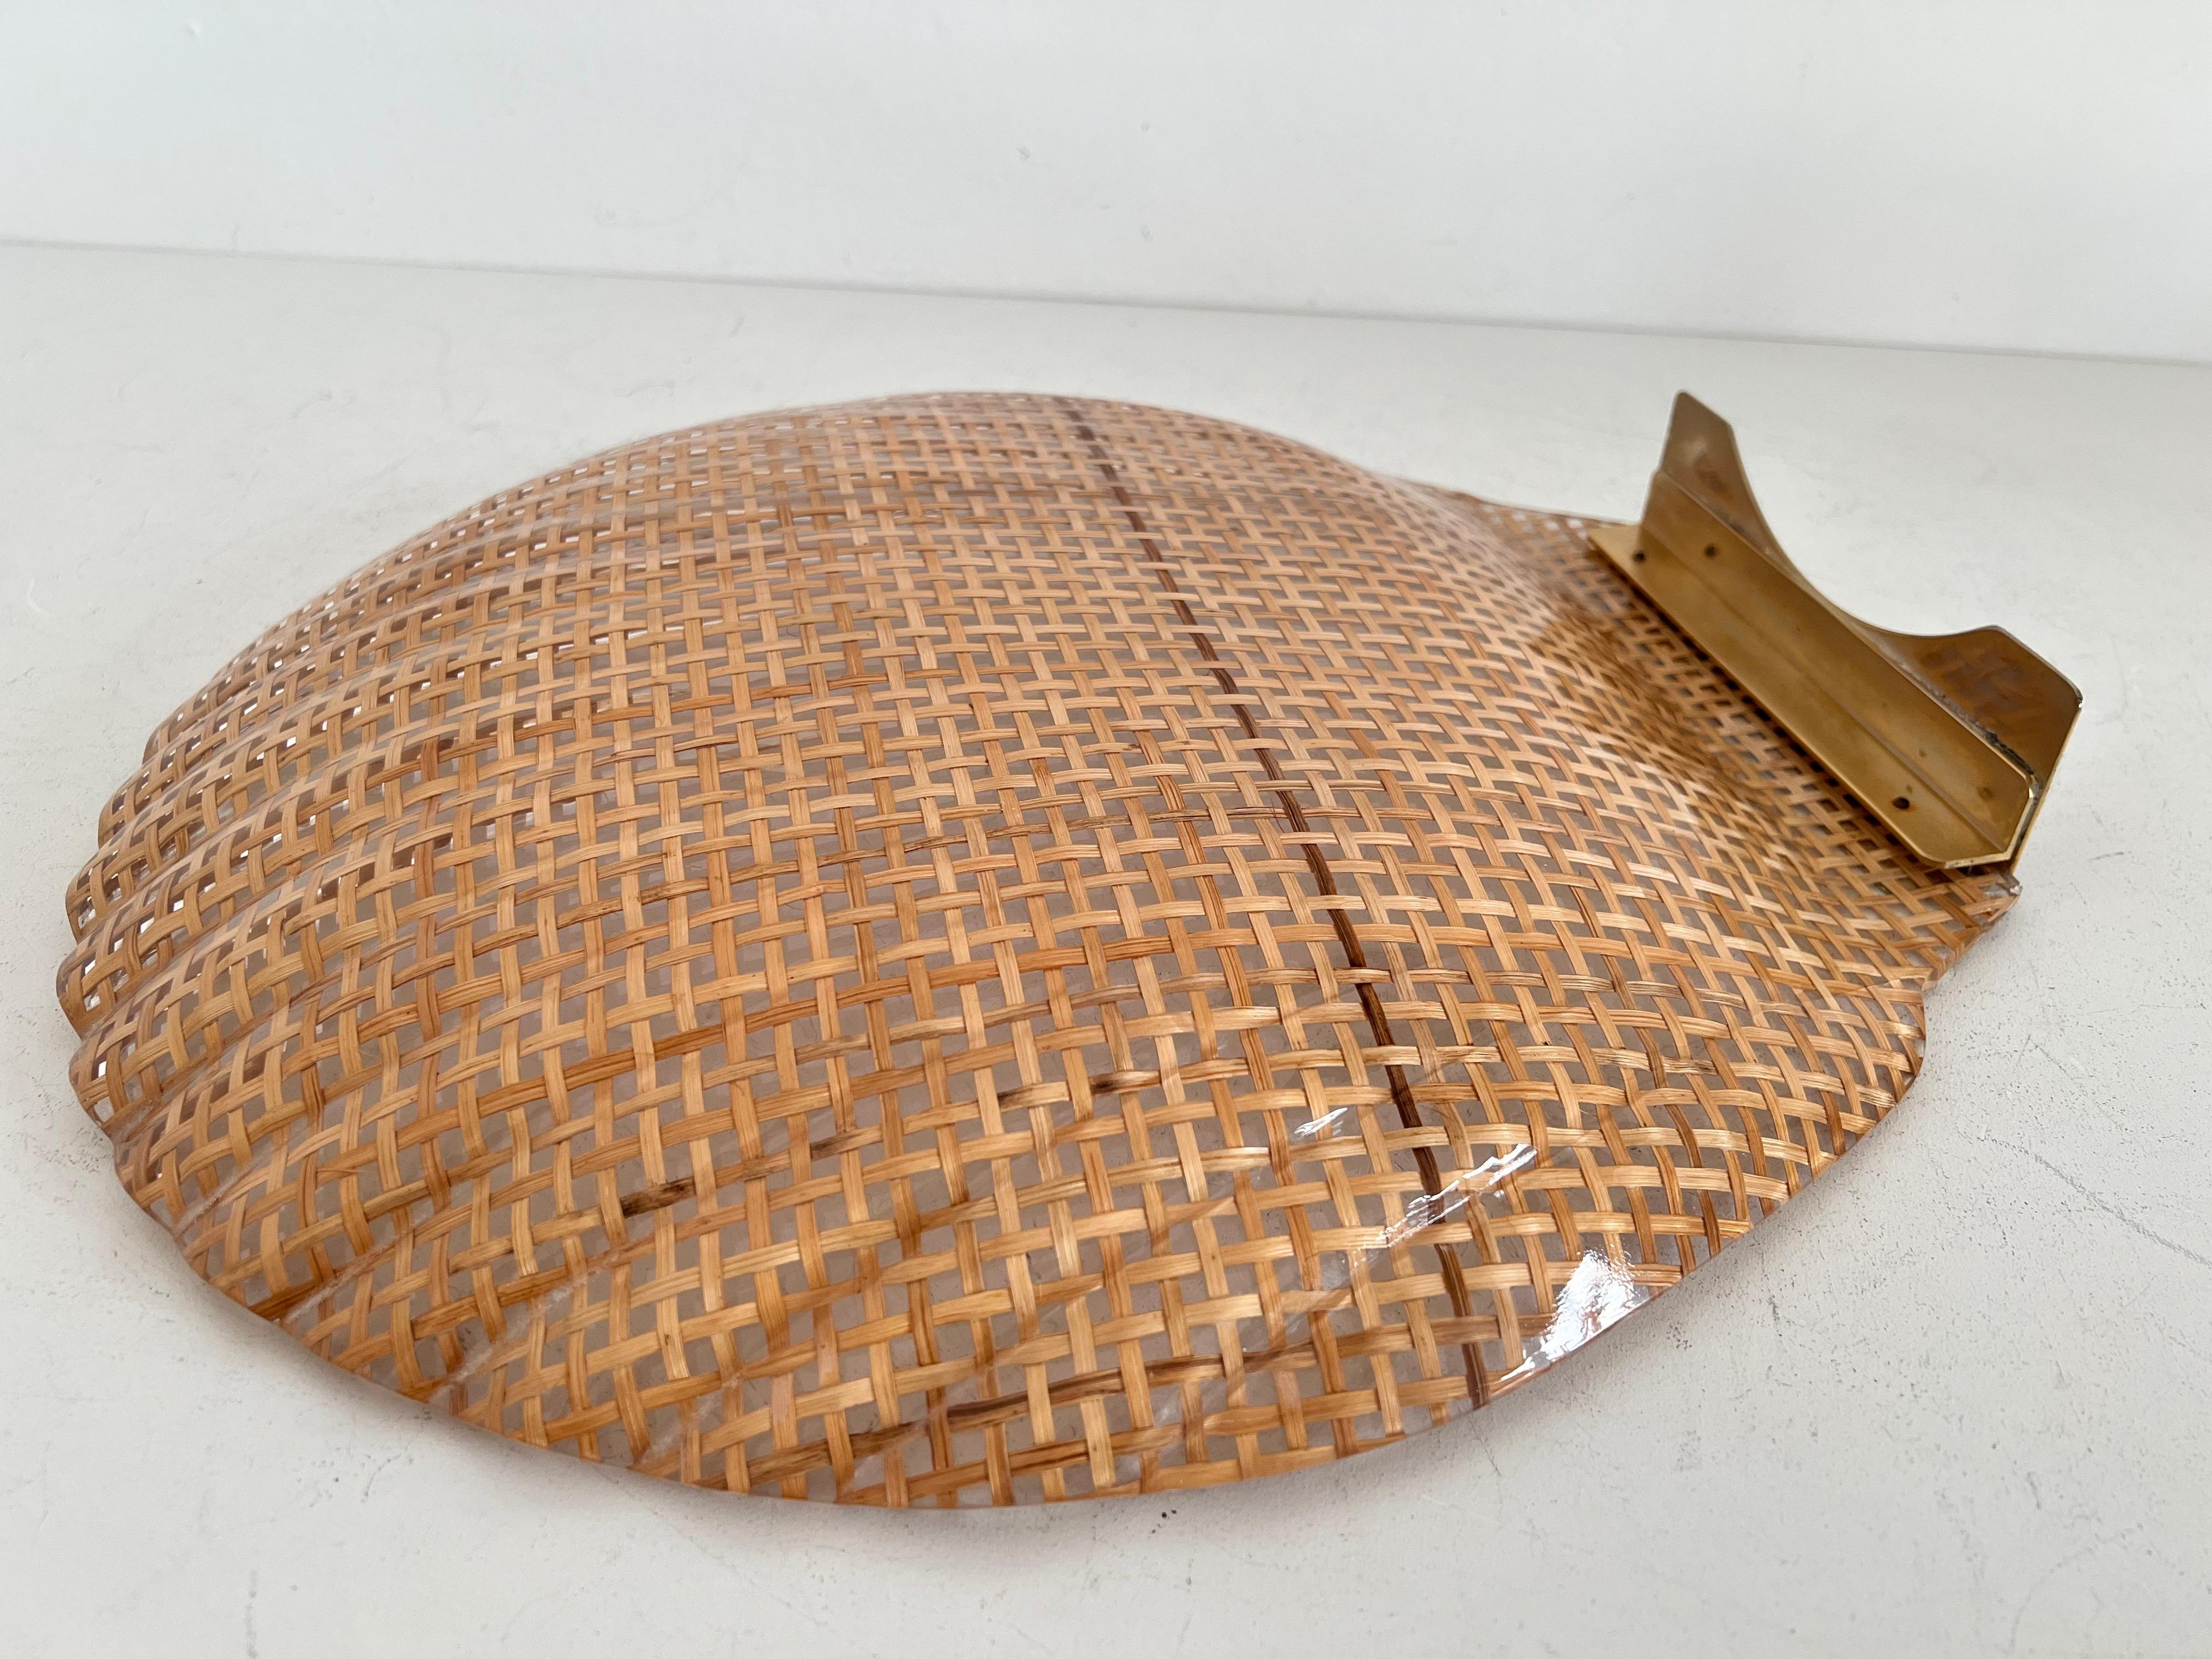 Italian MidCentury Serving Tray in Lucite, Rattan and Brass in Shell Shape, 1970 For Sale 8